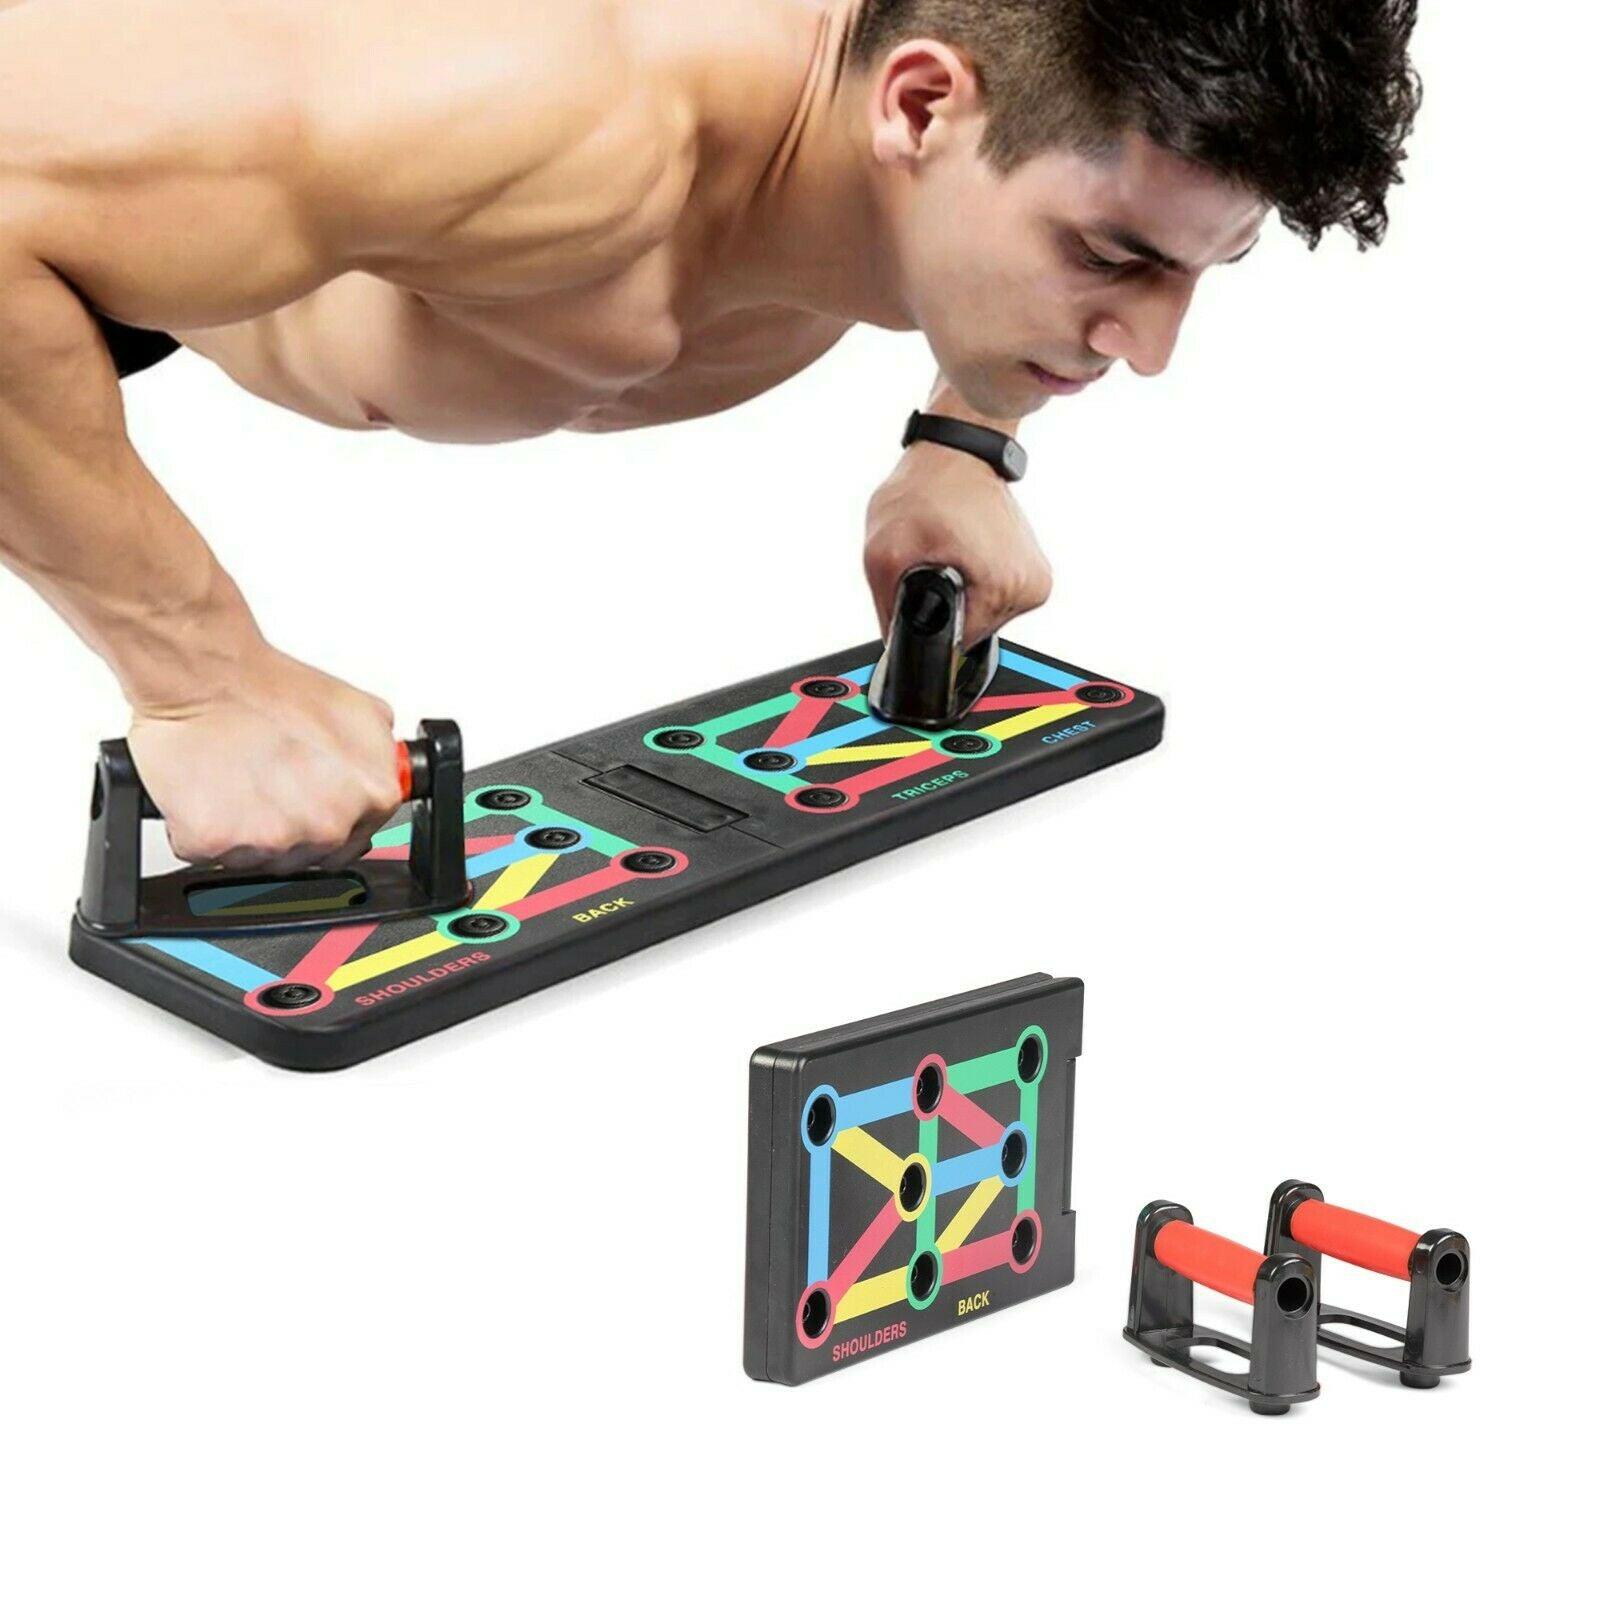 Portable 12-IN-1 Fold Push Up Rack Board Exercise Tool - Bosonshop